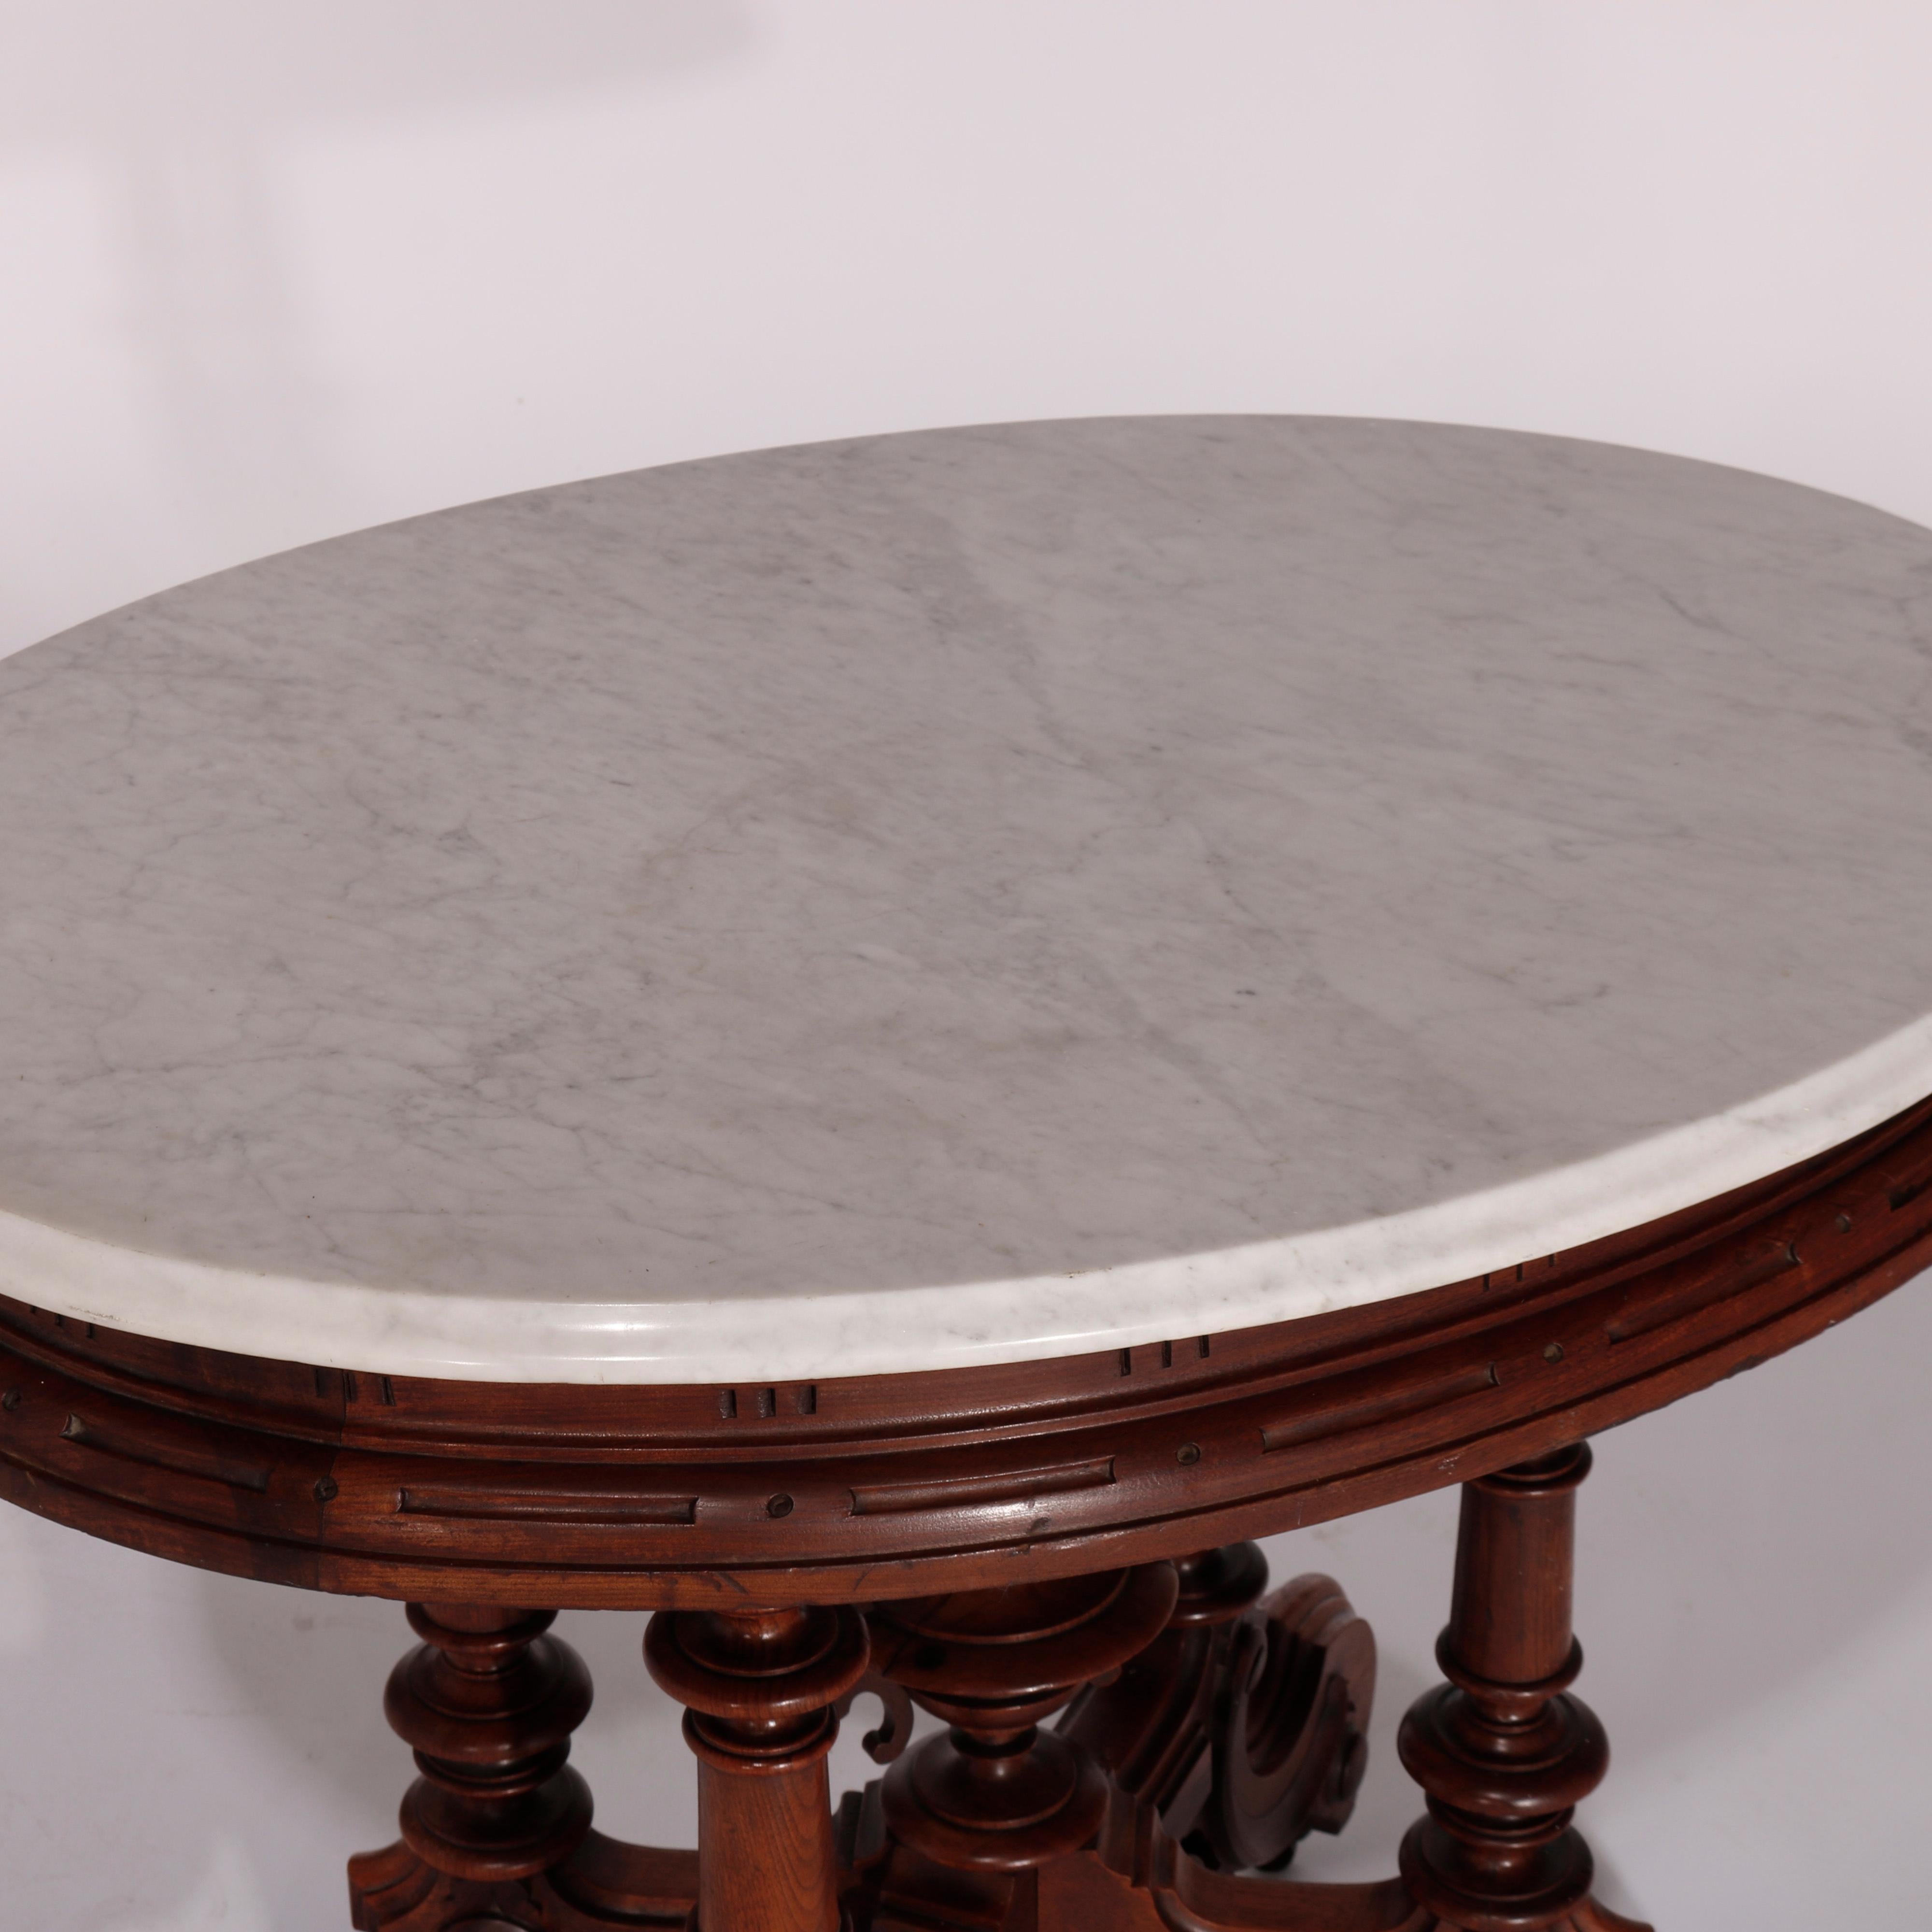 Antique Victorian Brooks Brothers Walnut & Marble Parlor Table, circa 1890 For Sale 8